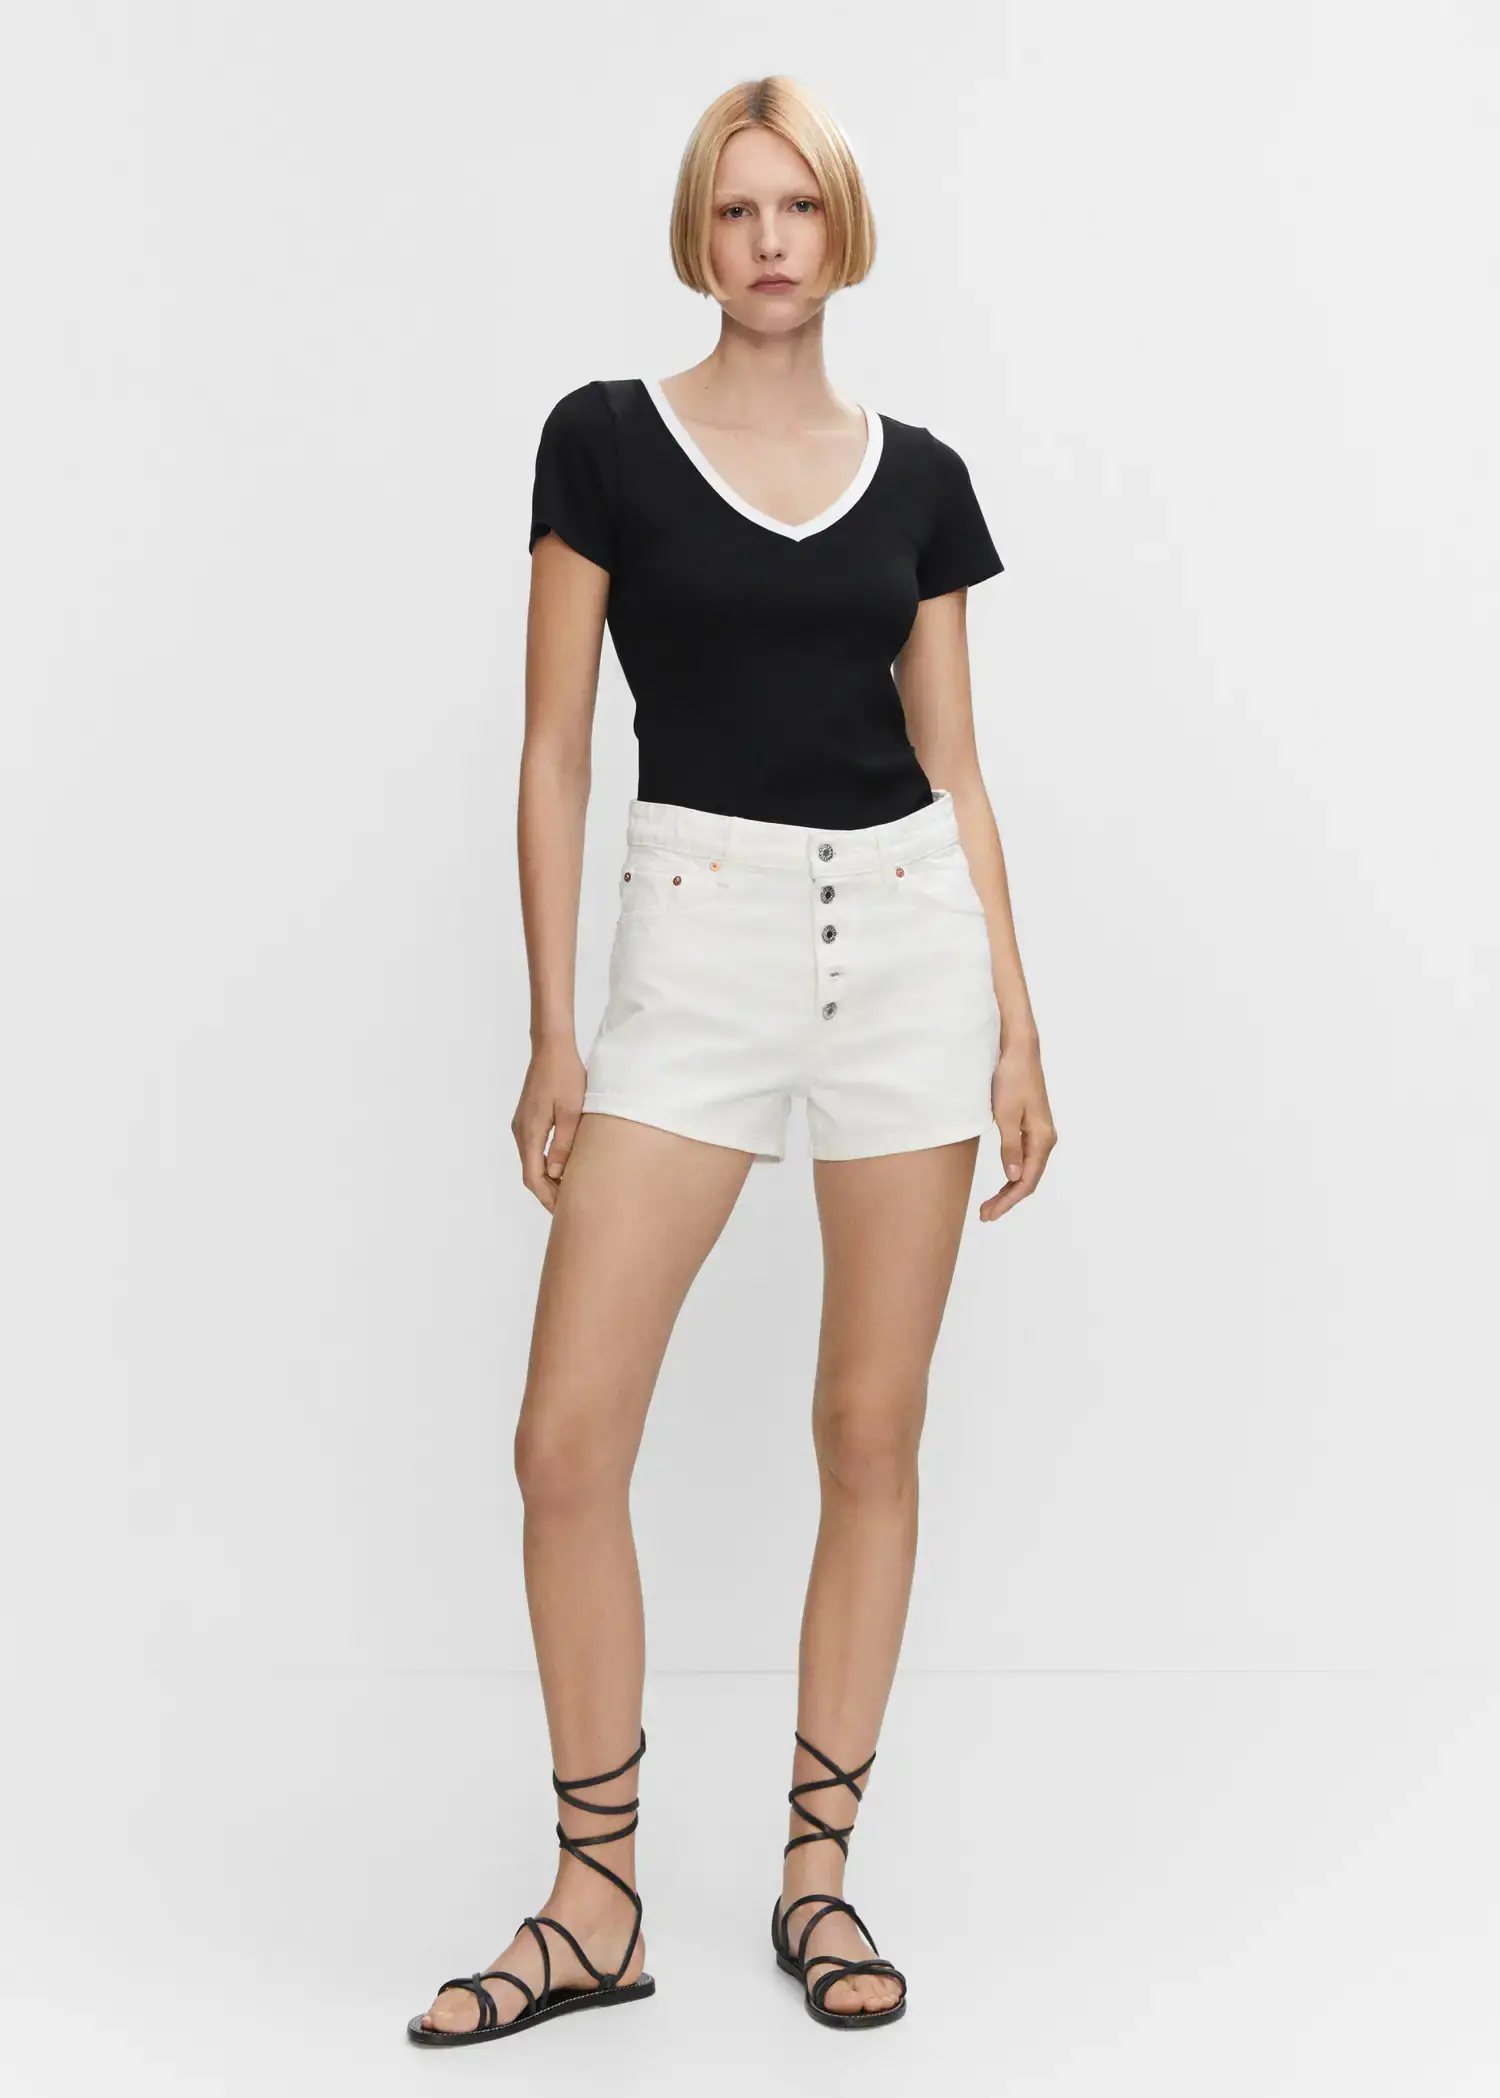 Mango Contrast collar shirt. a woman in black shirt and white shorts. 